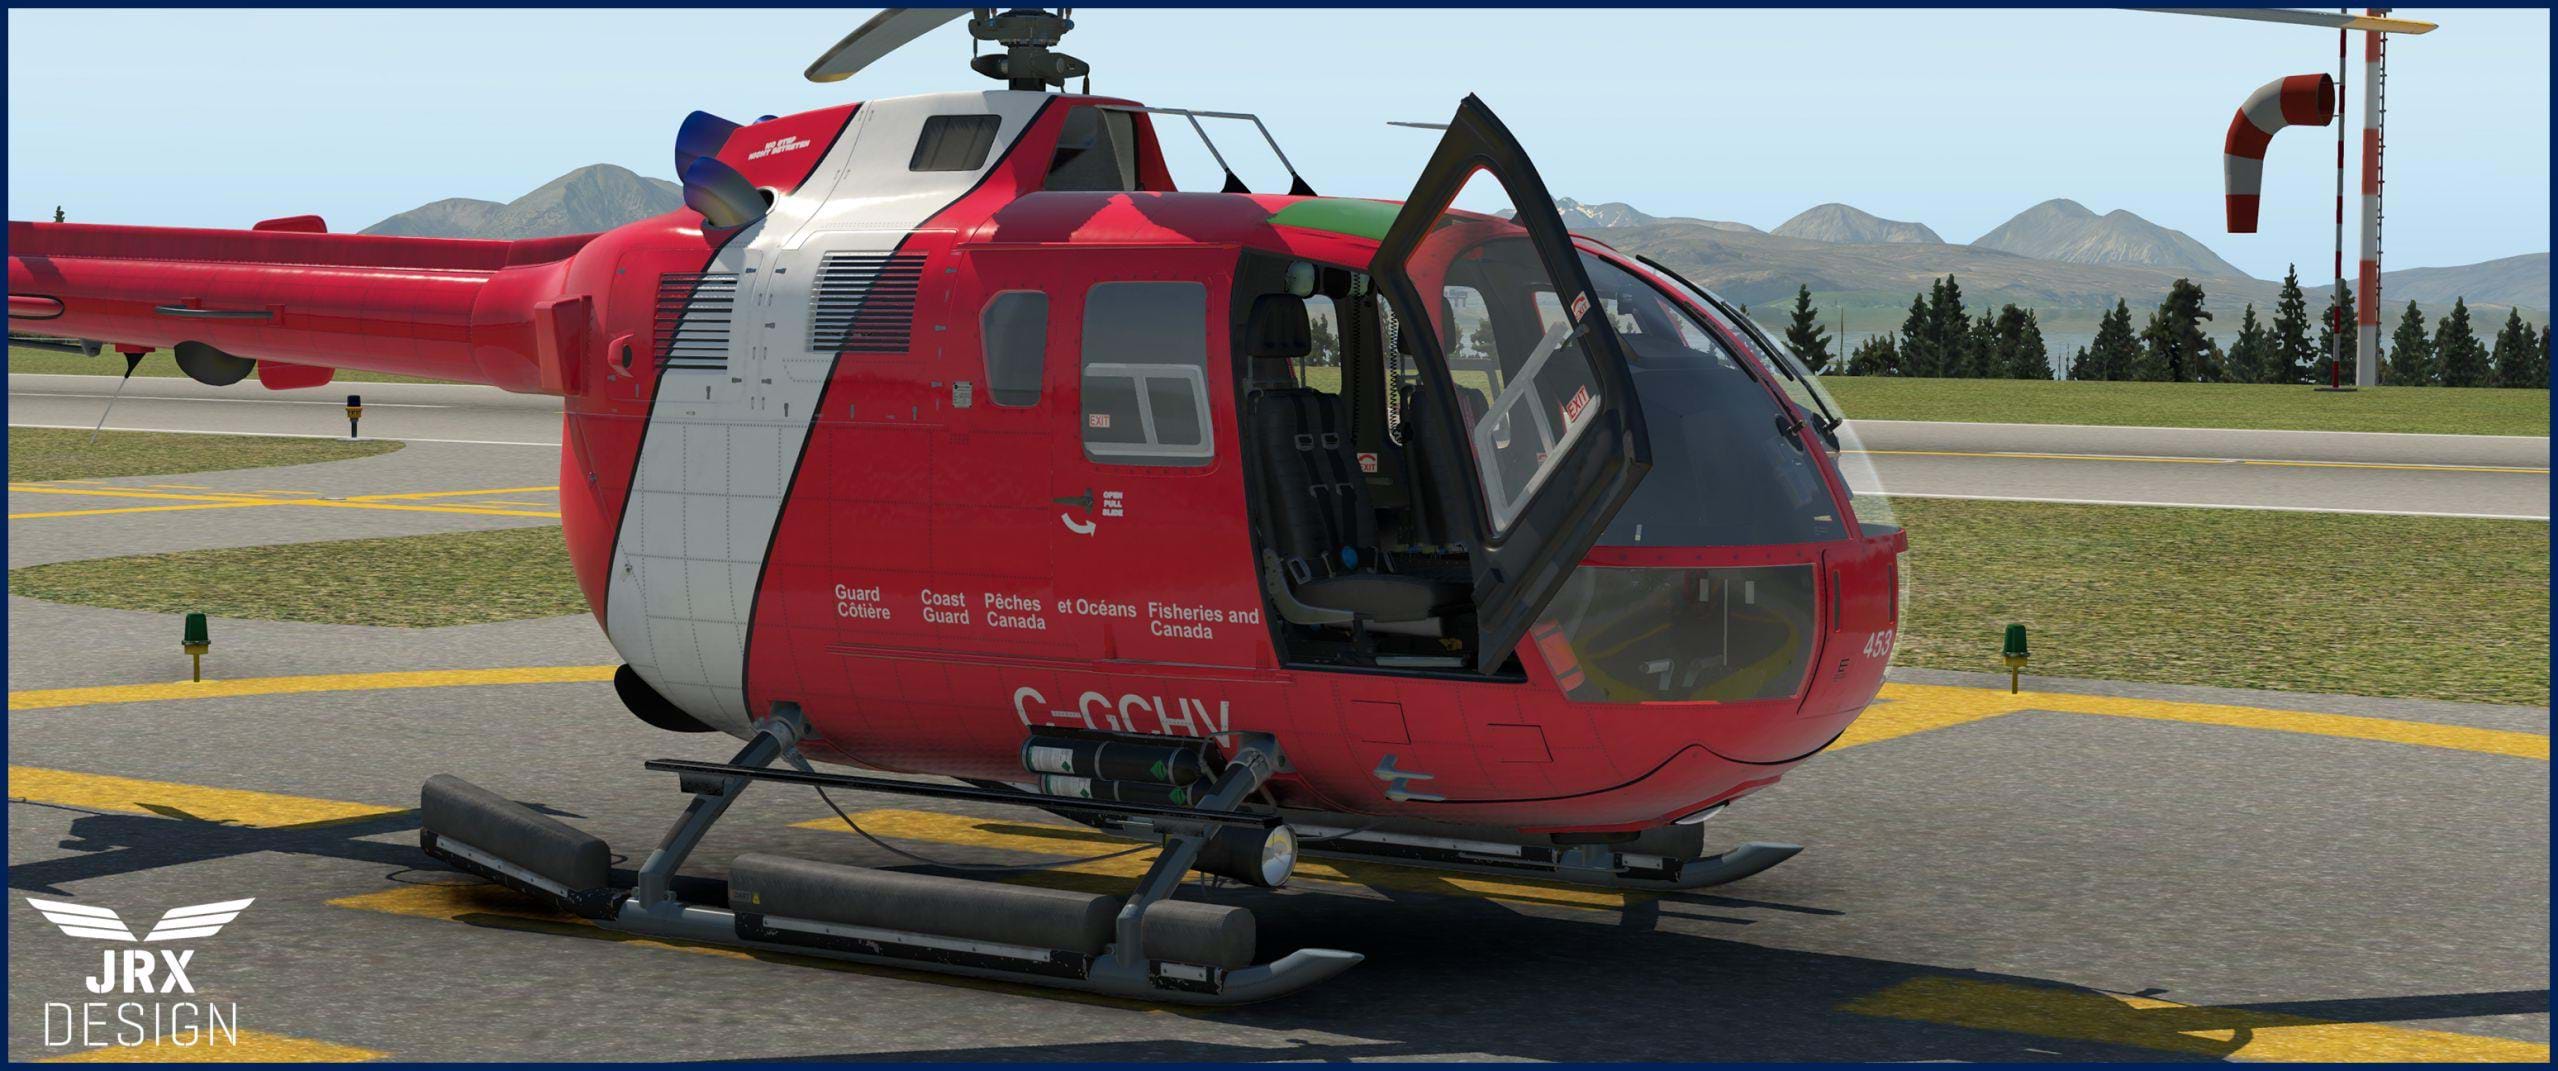 JRX Design released the Bo 105 DBS-4 for X-Plane